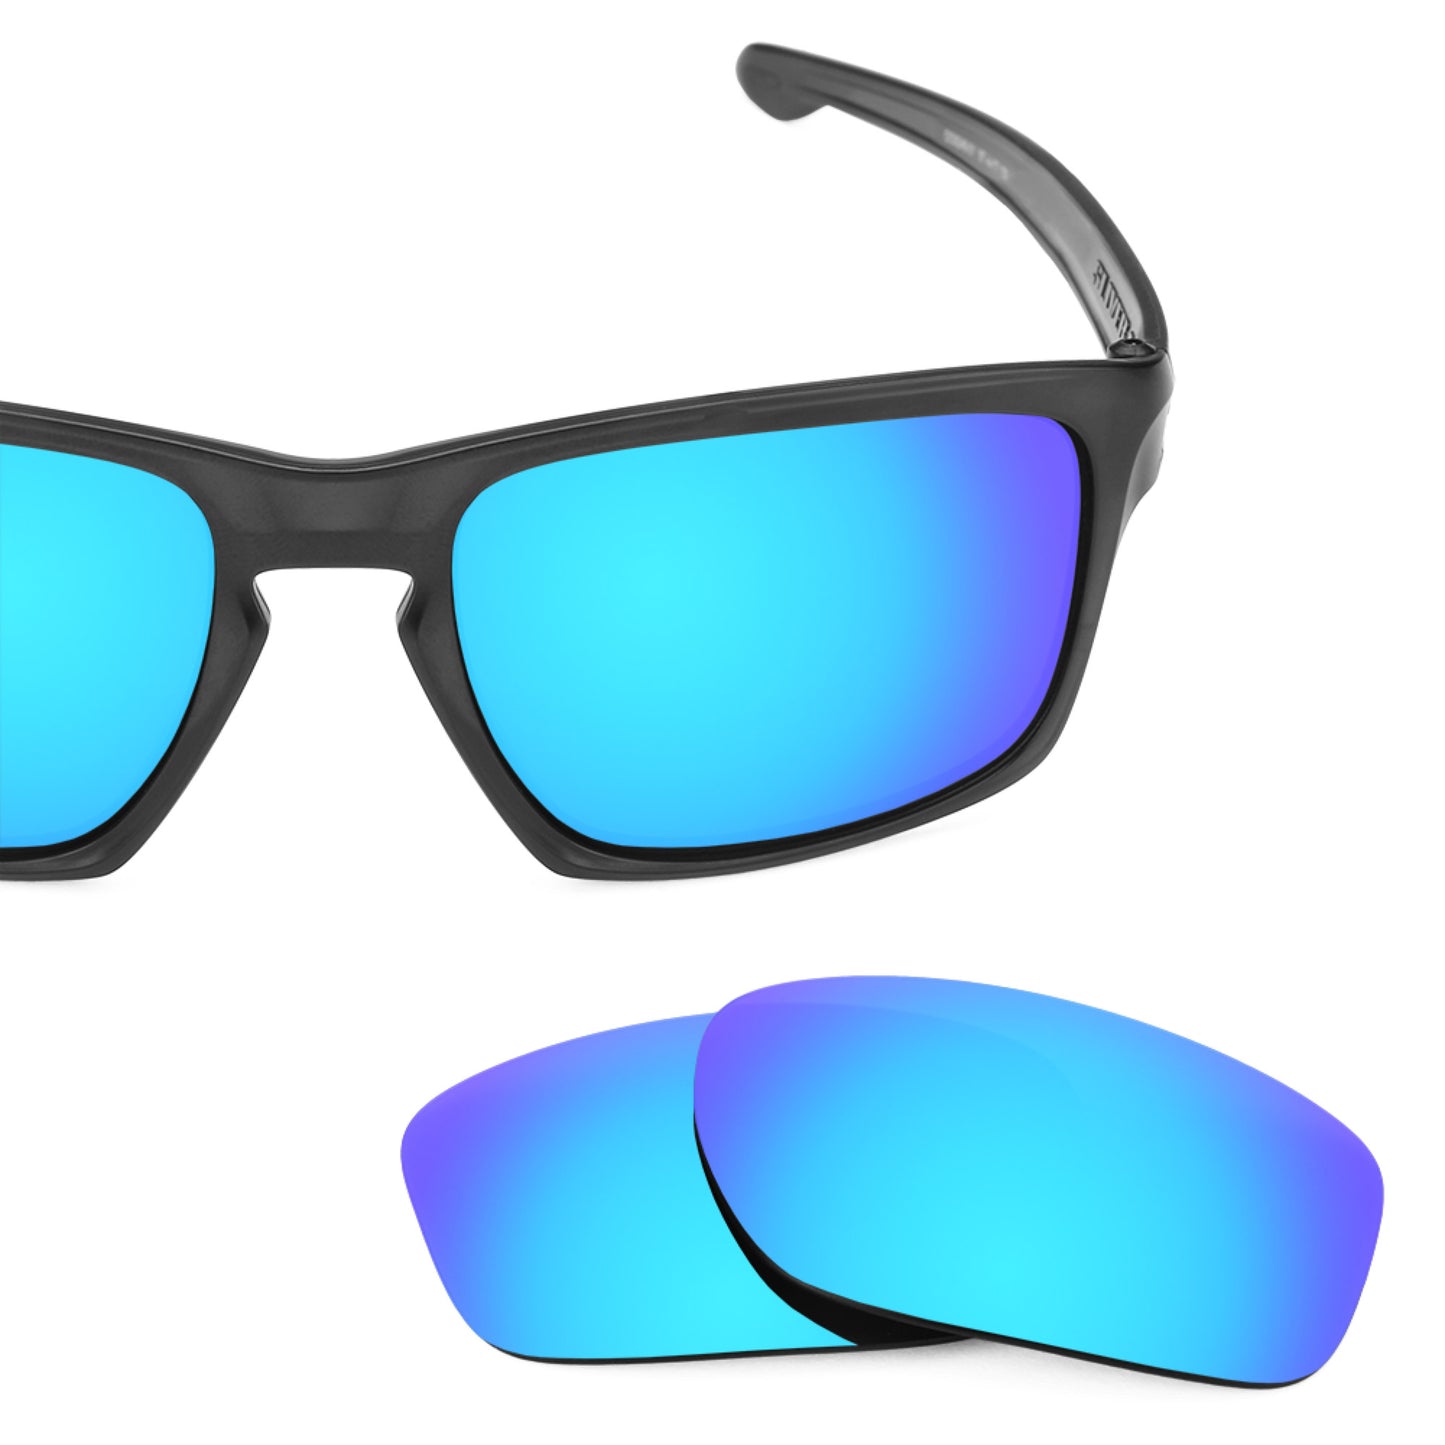 Revant replacement lenses for Oakley Sliver Non-Polarized Ice Blue